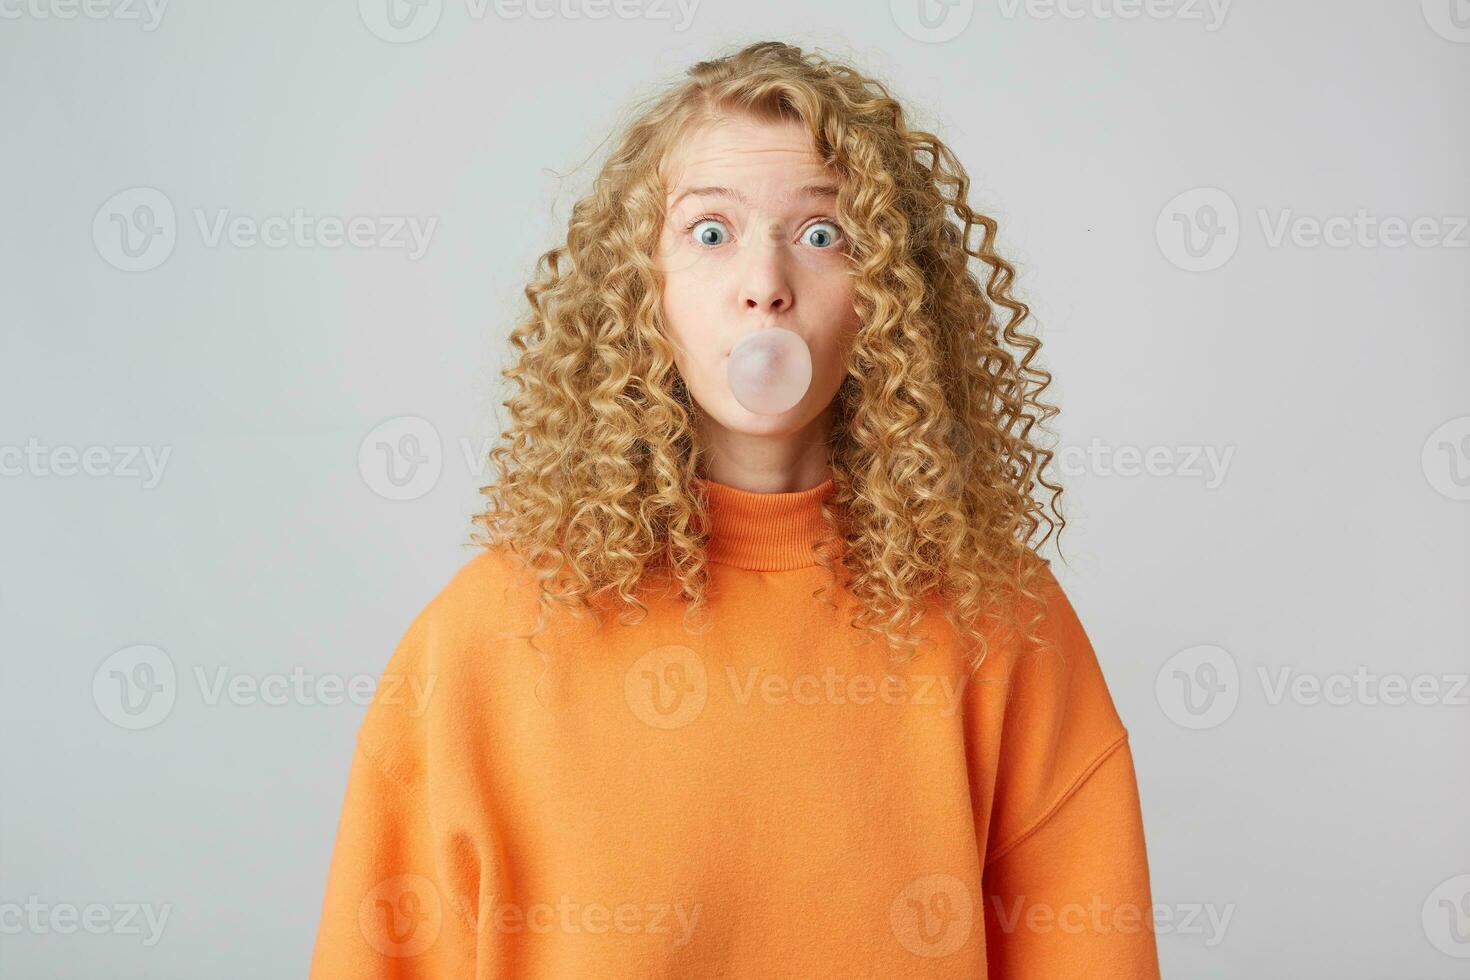 Misunderstanding, naive curly blonde lady dressed in warm orange oversize sweater looking camera isolated over white background while blowing bubble with chewing gum photo